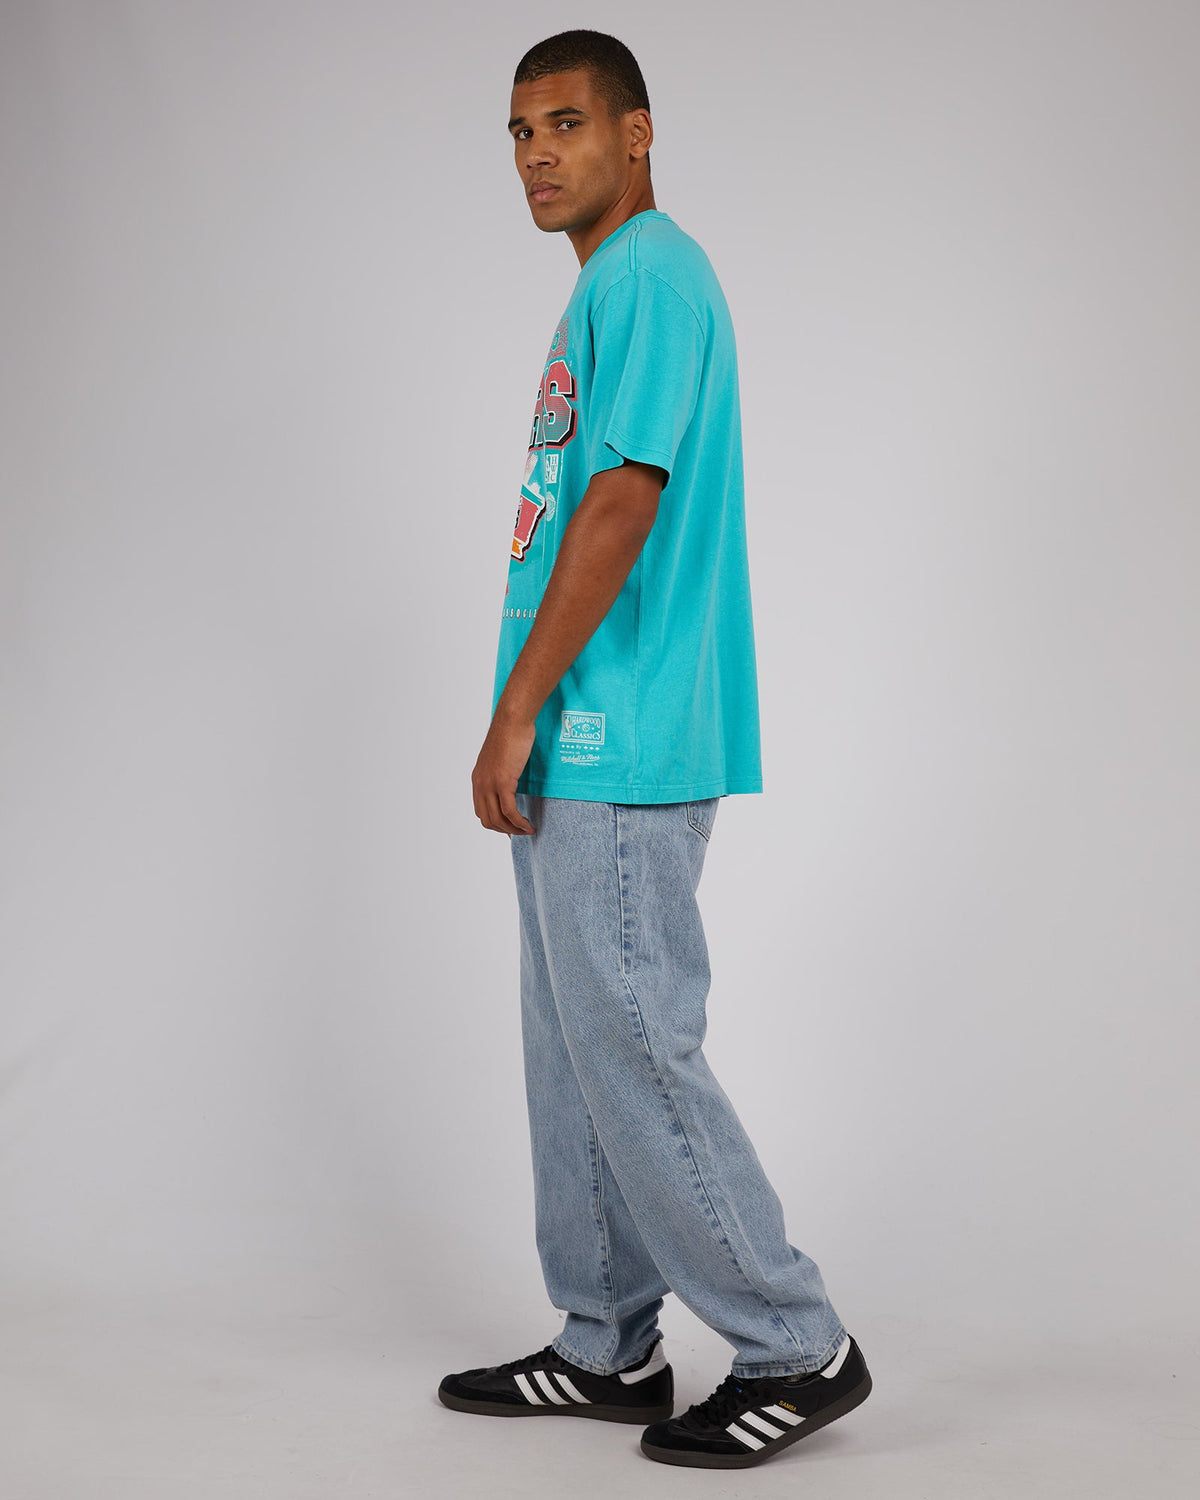 Mitchell &amp; Ness-Brush Off Tee Spurs Teal-Edge Clothing